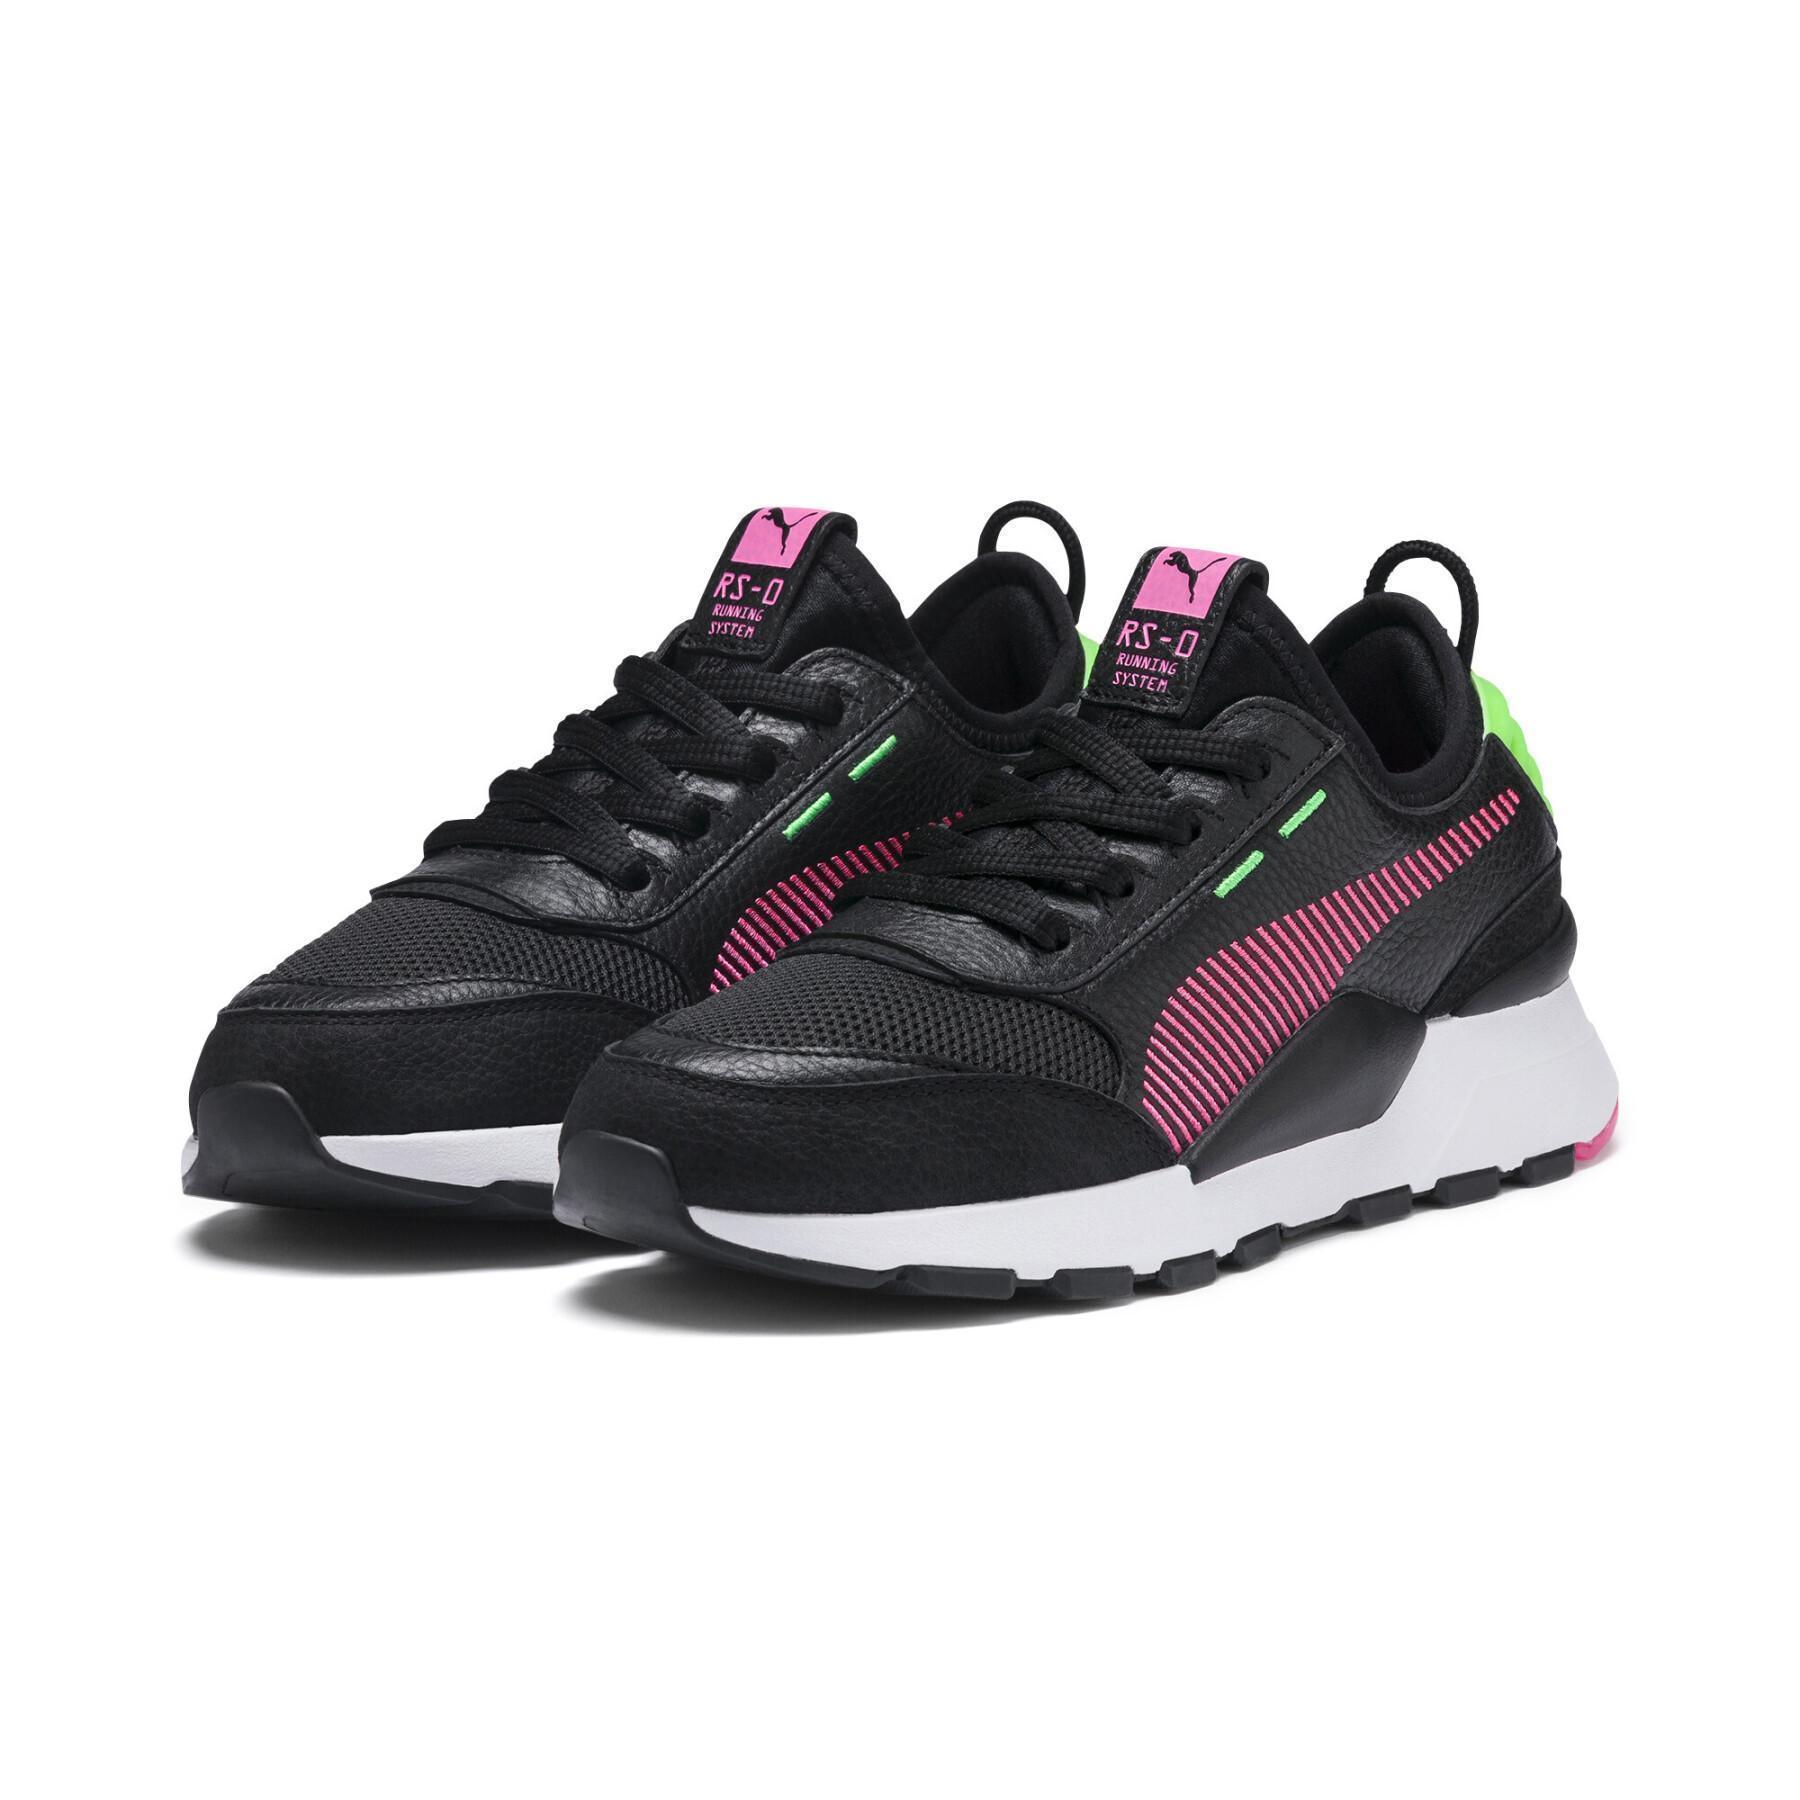 Sneakers Puma RS-0